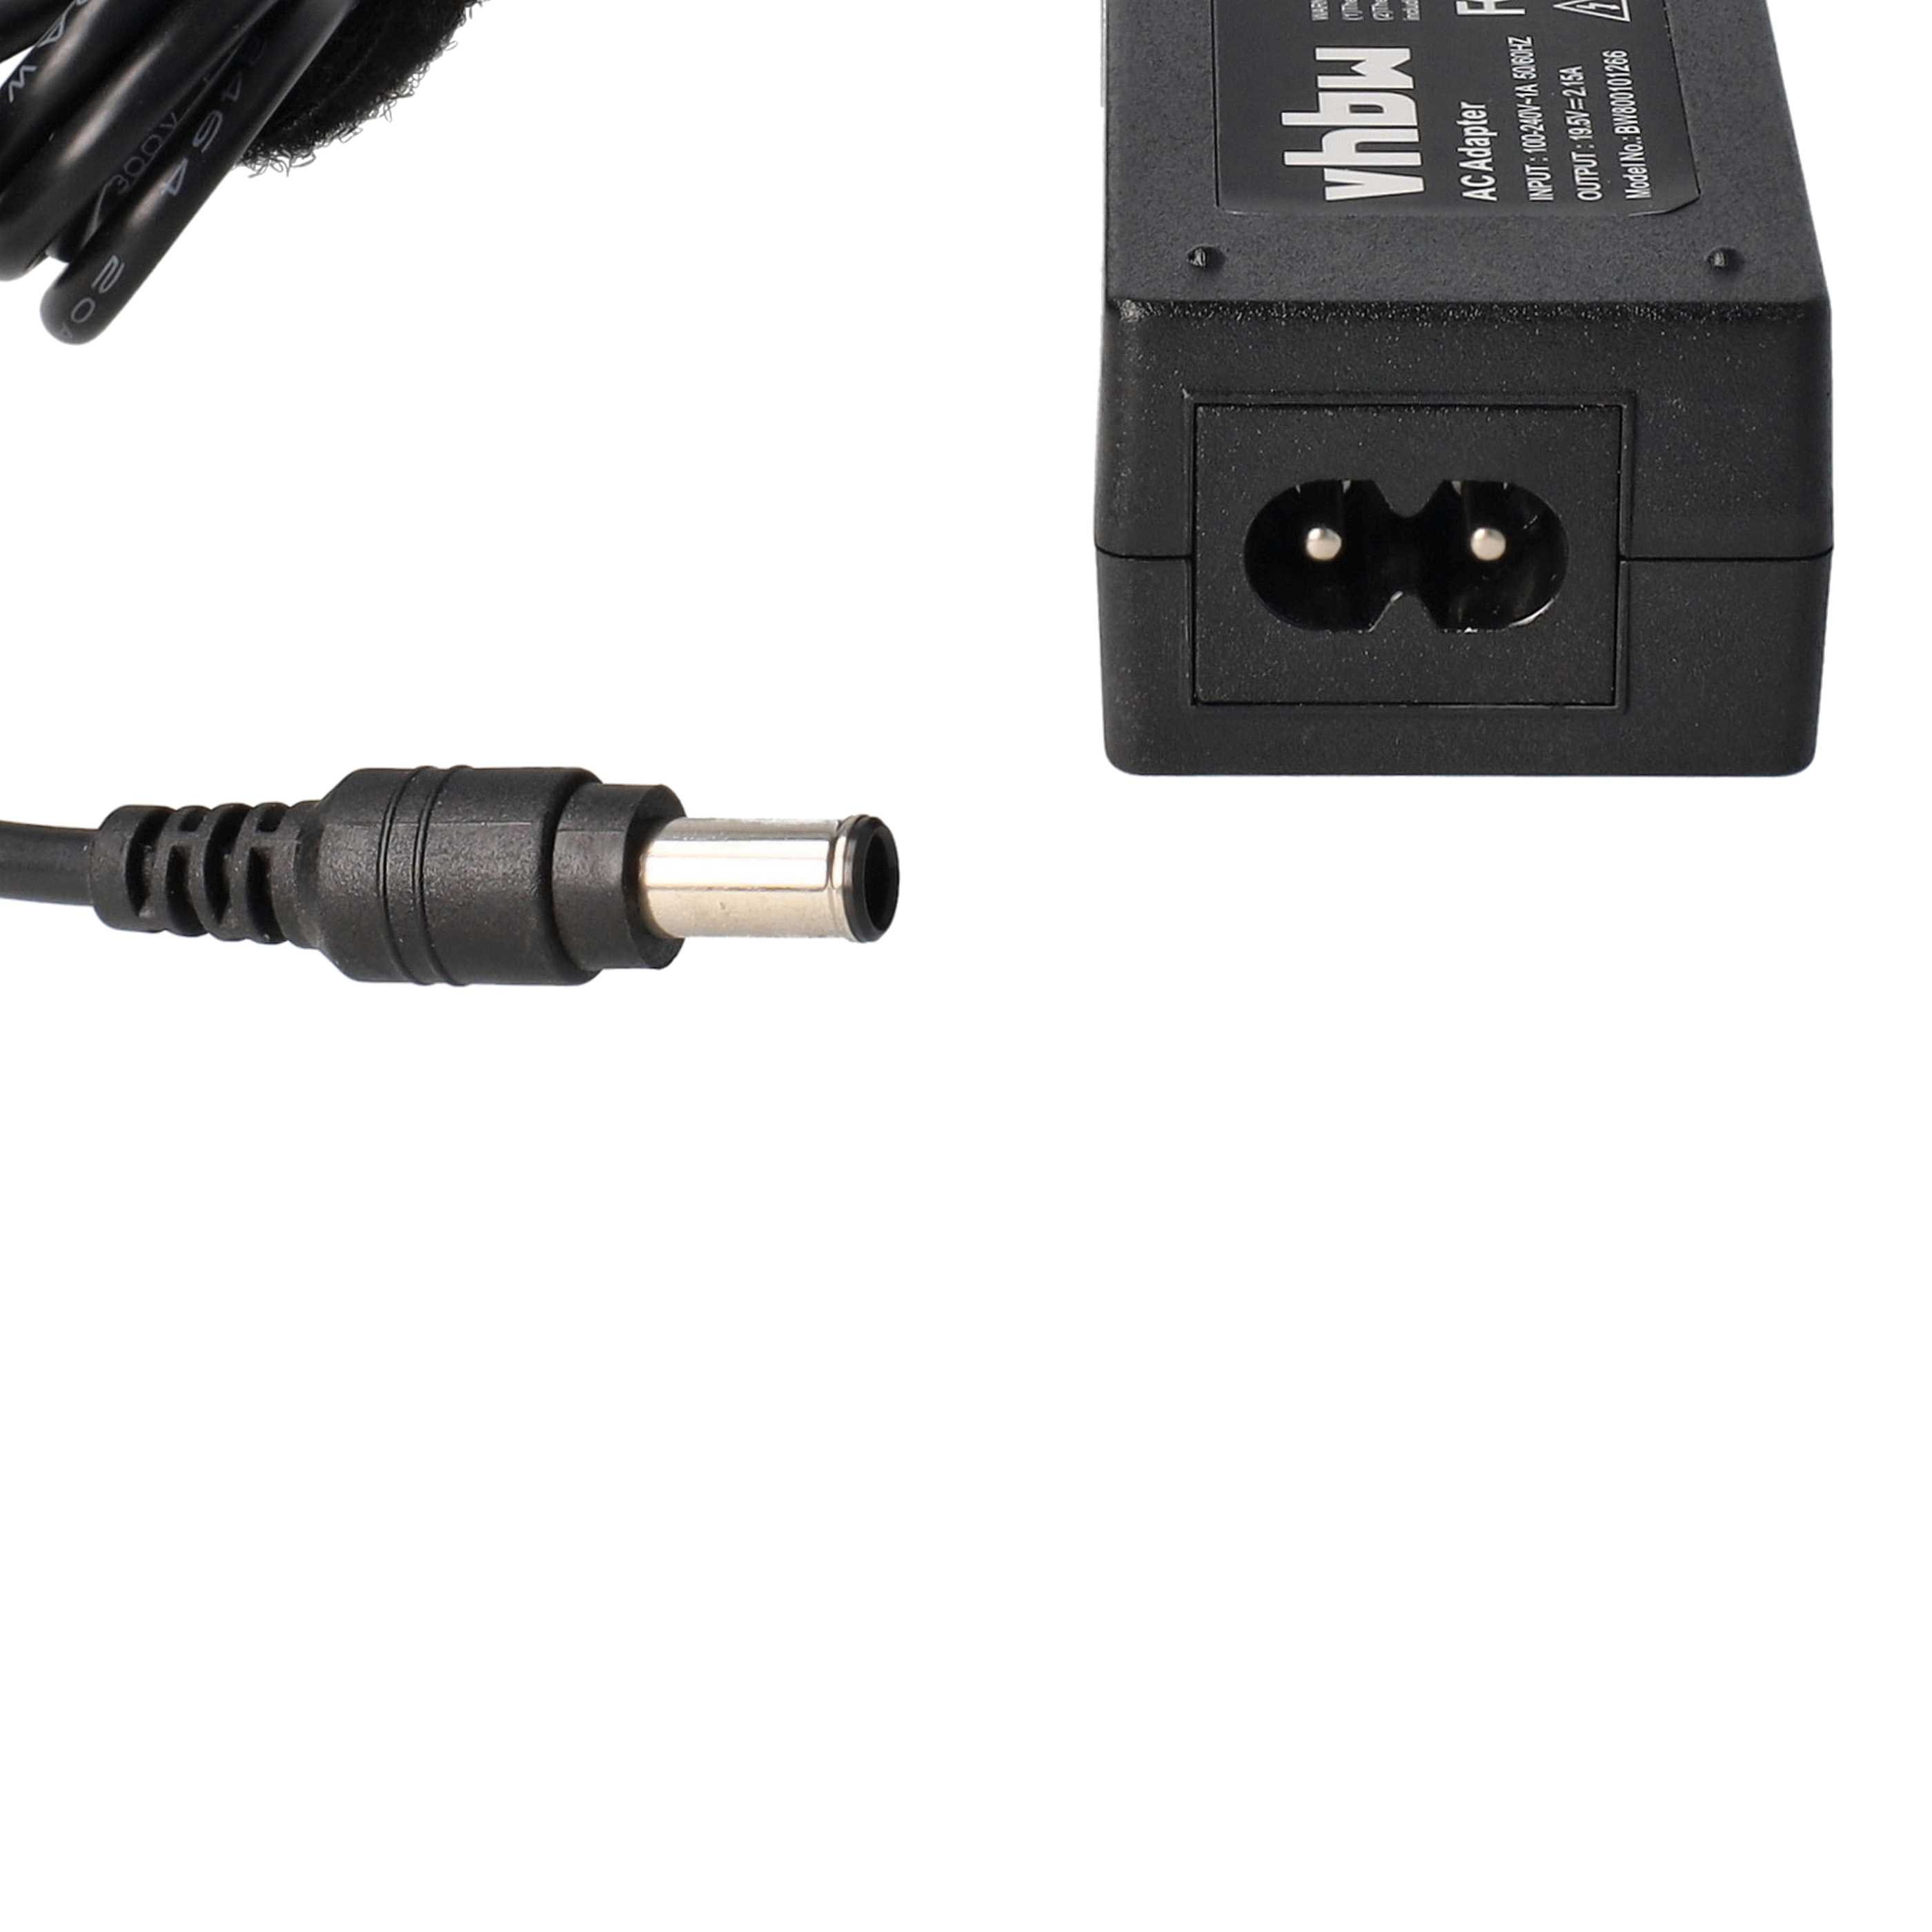 Mains Power Adapter replaces Sony PCGA-ACX1 for SonyNotebook, 42 W